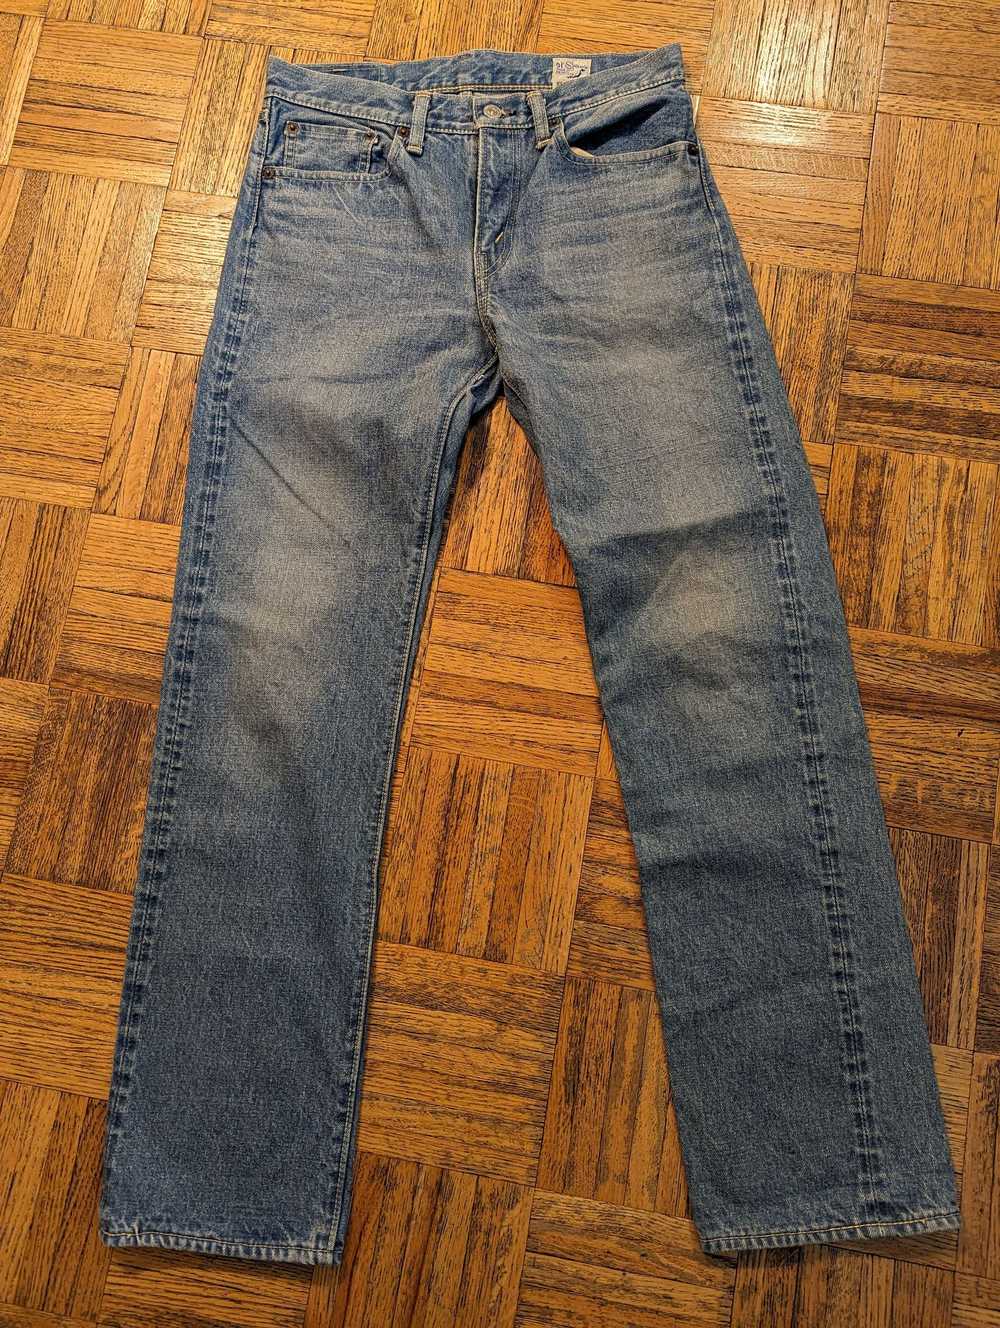 Orslow Selvedge jeans, made in Japan - image 1